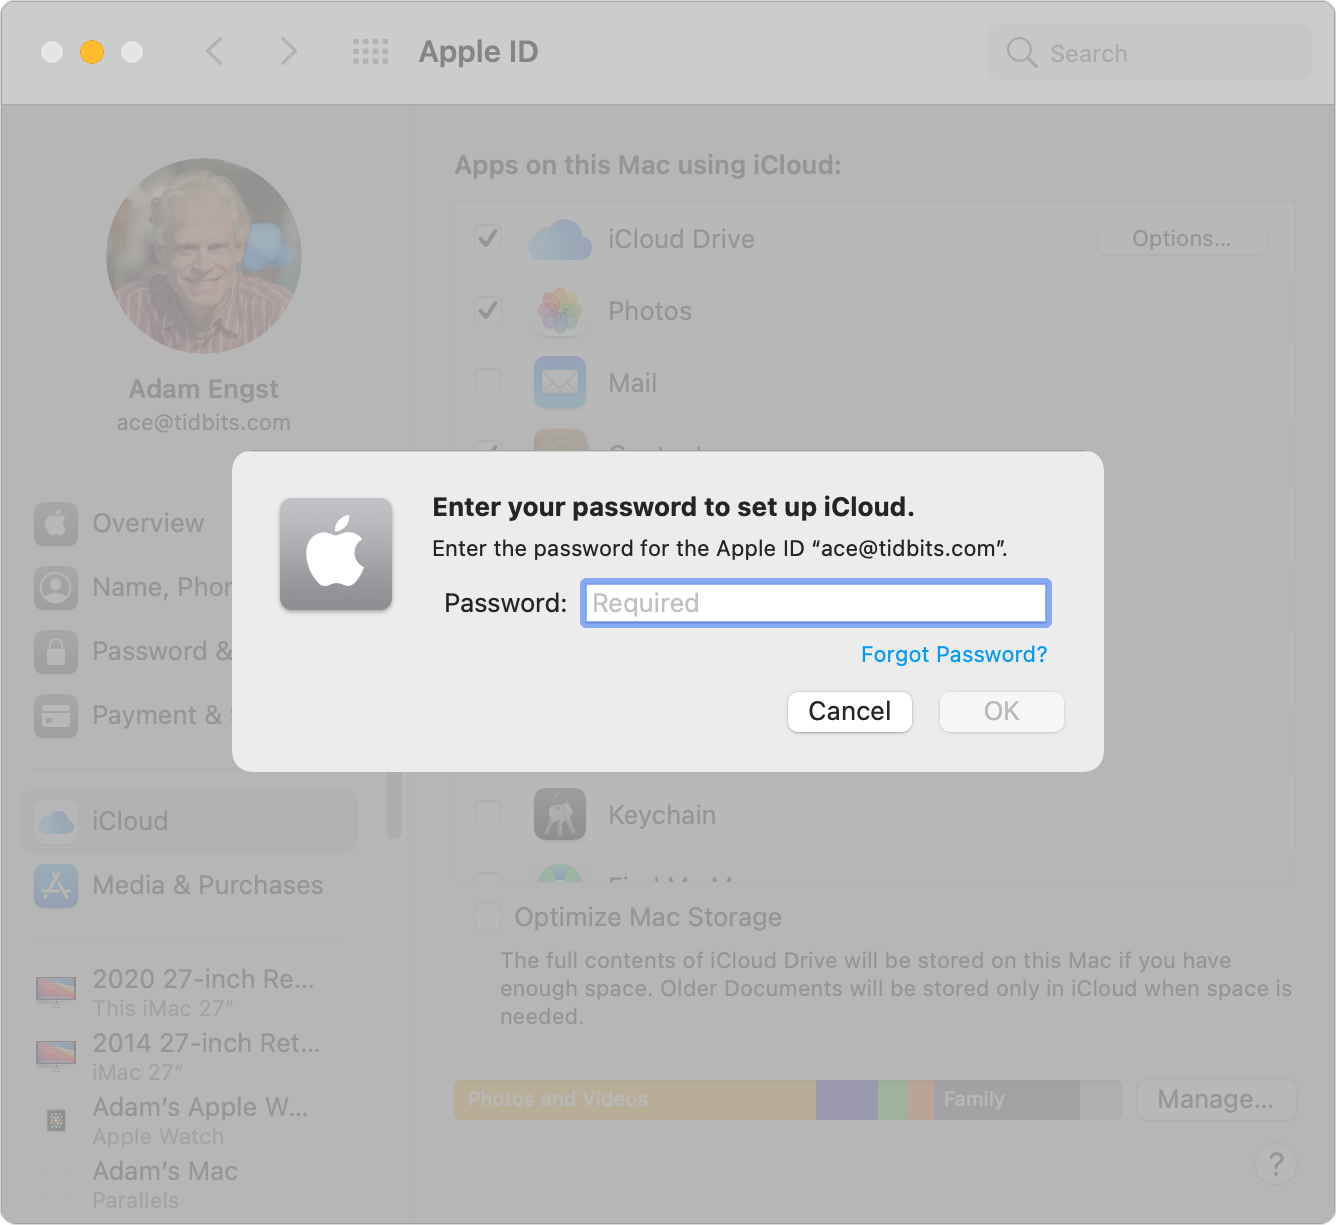 activation code for sms forwarding not showing up on mac os sierra